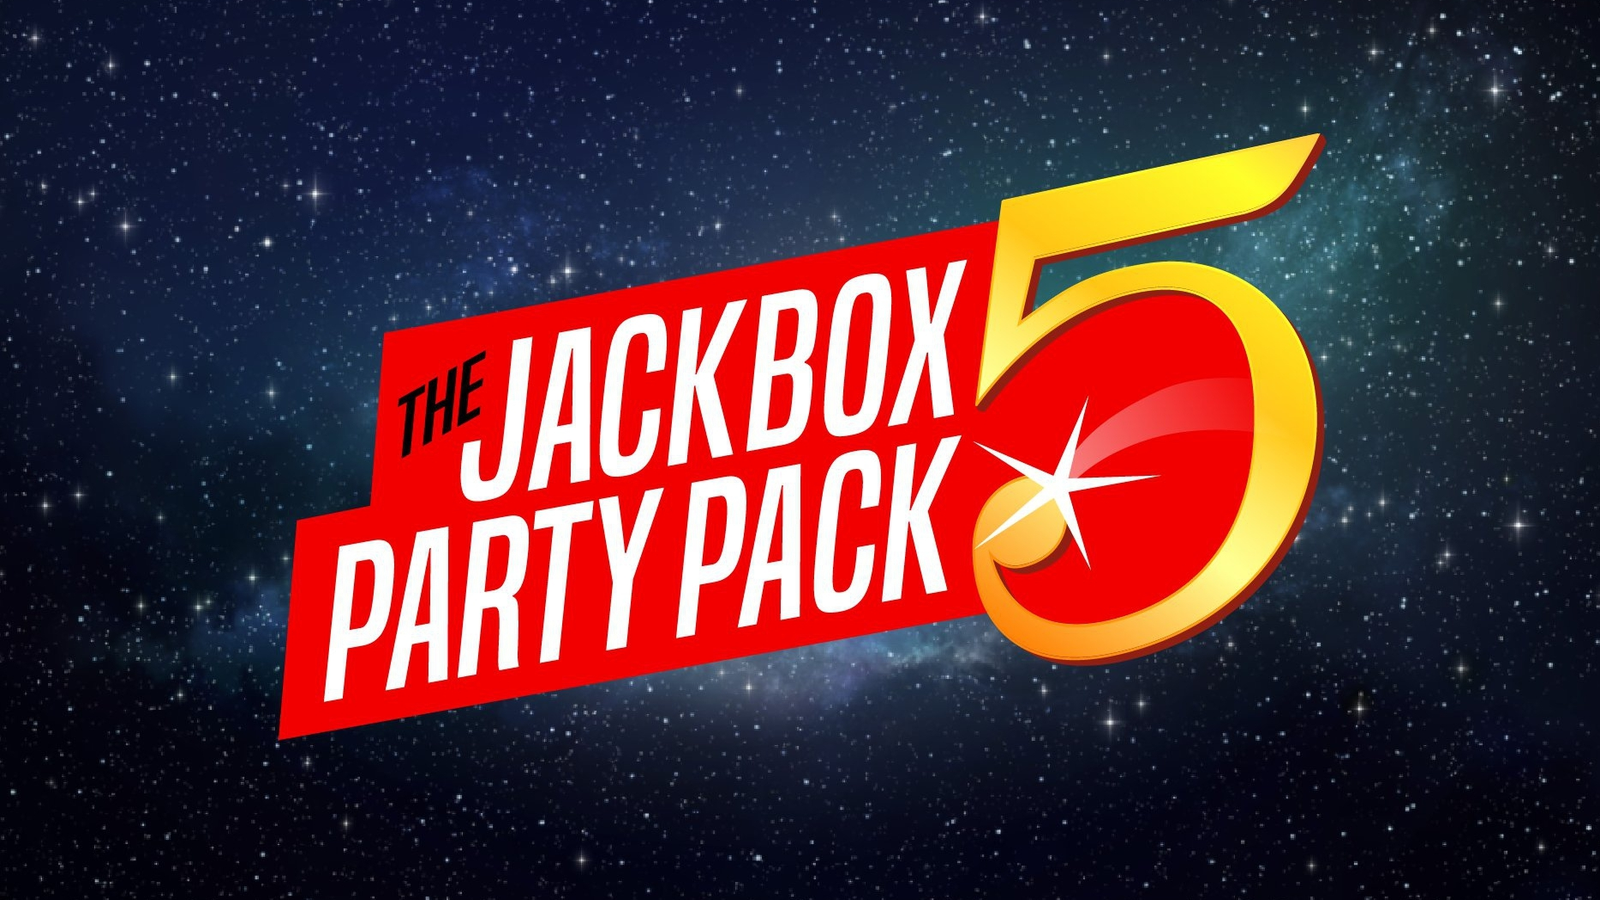 Jackbox Games - The Best Jackbox Party Games for Two Players